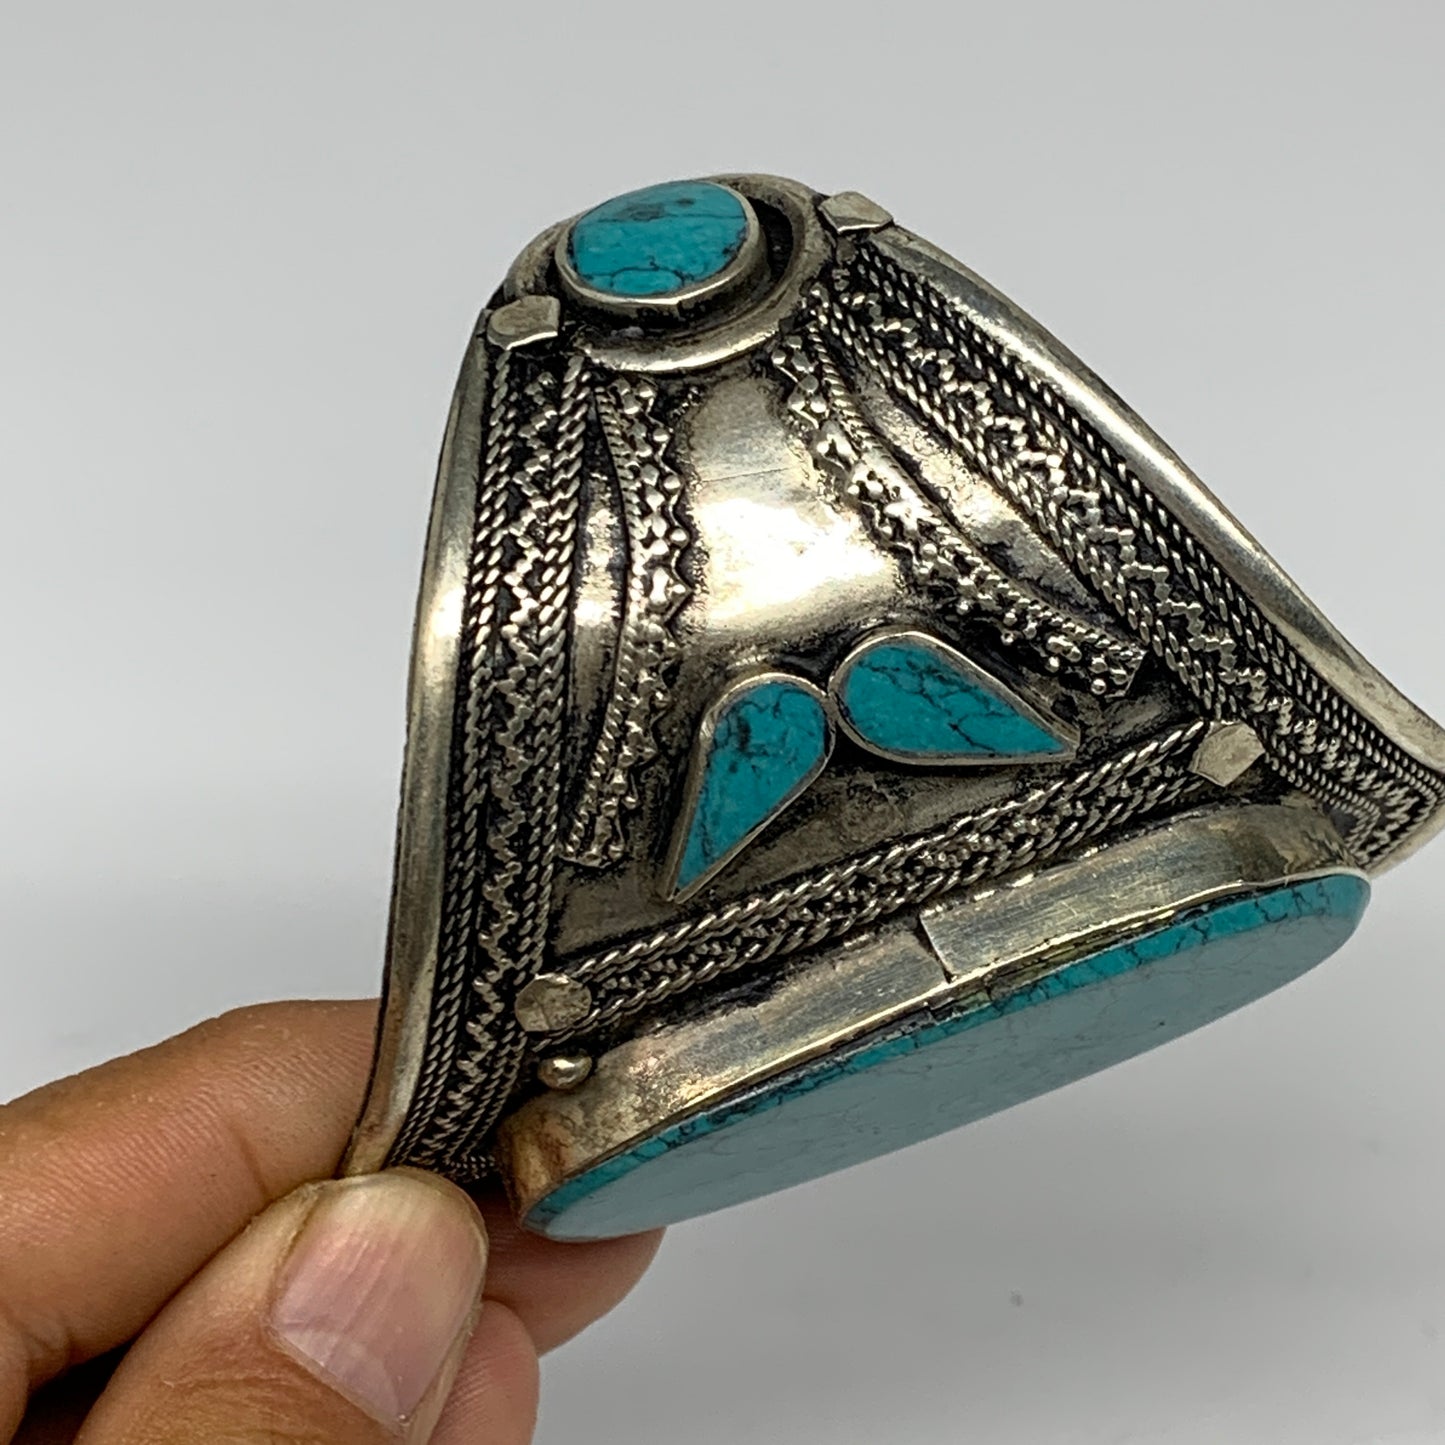 55.5g, Vintage Reproduced Afghan Turkmen Synthetic Turquoise Cuff Bracelet, B132